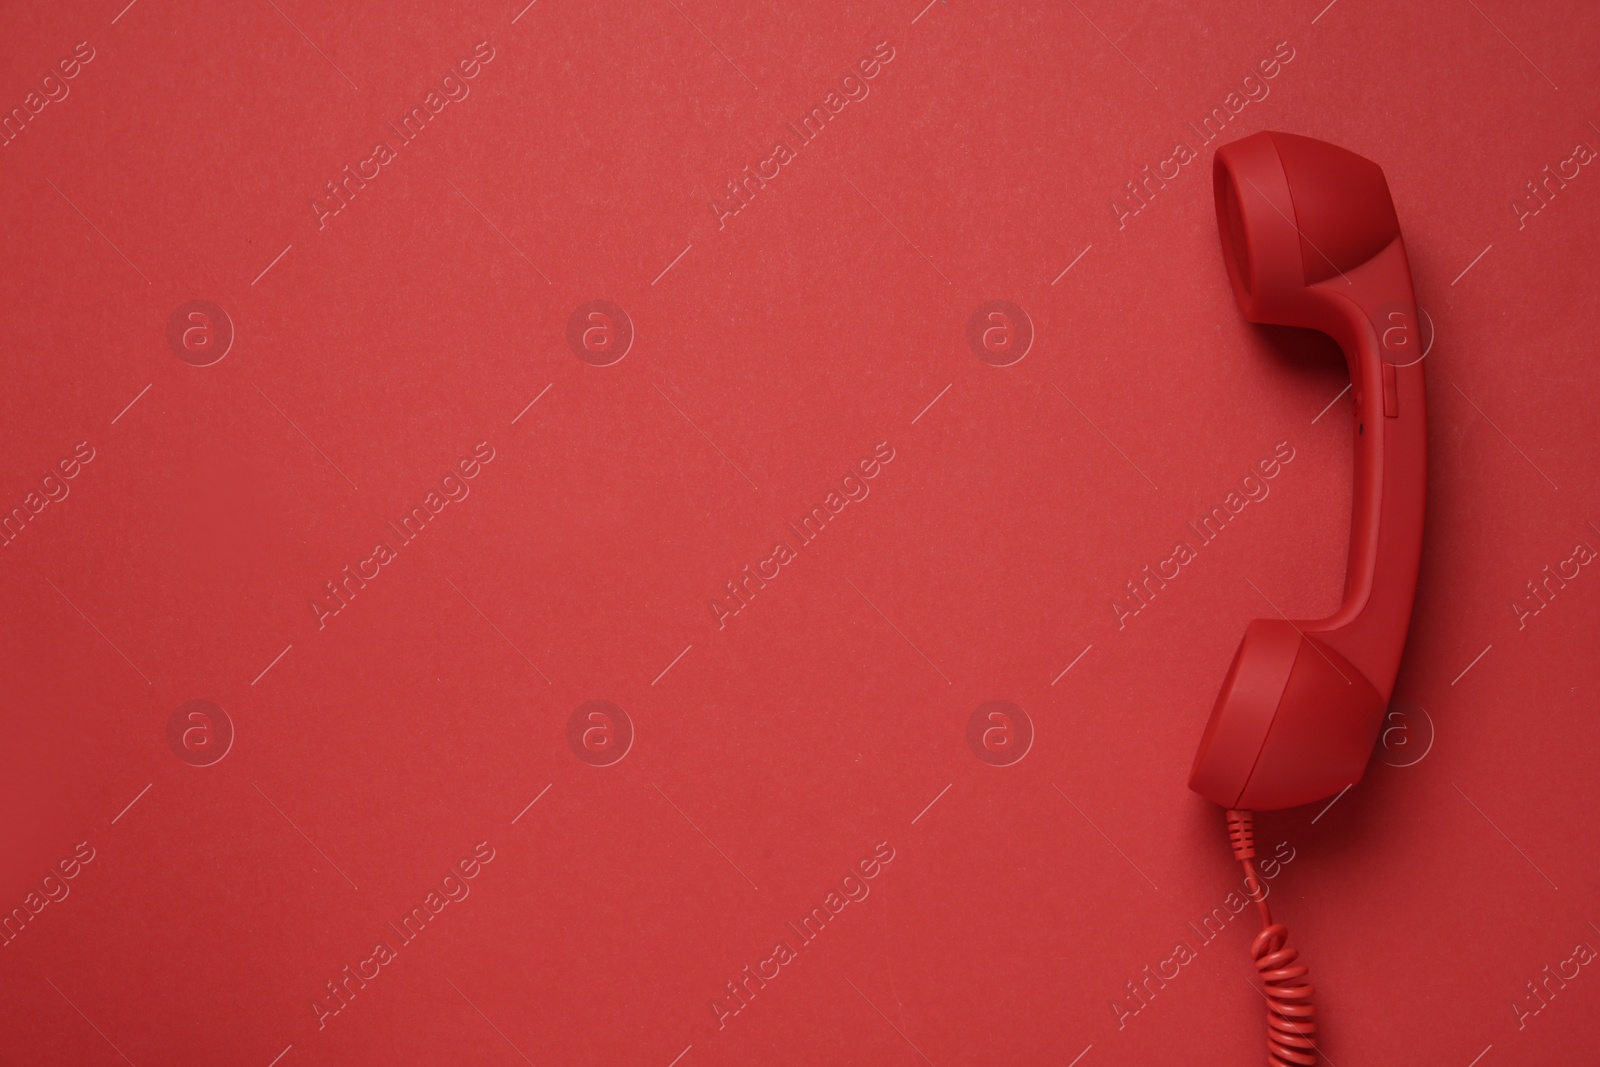 Photo of Corded telephone handset on red background, top view. Hotline concept